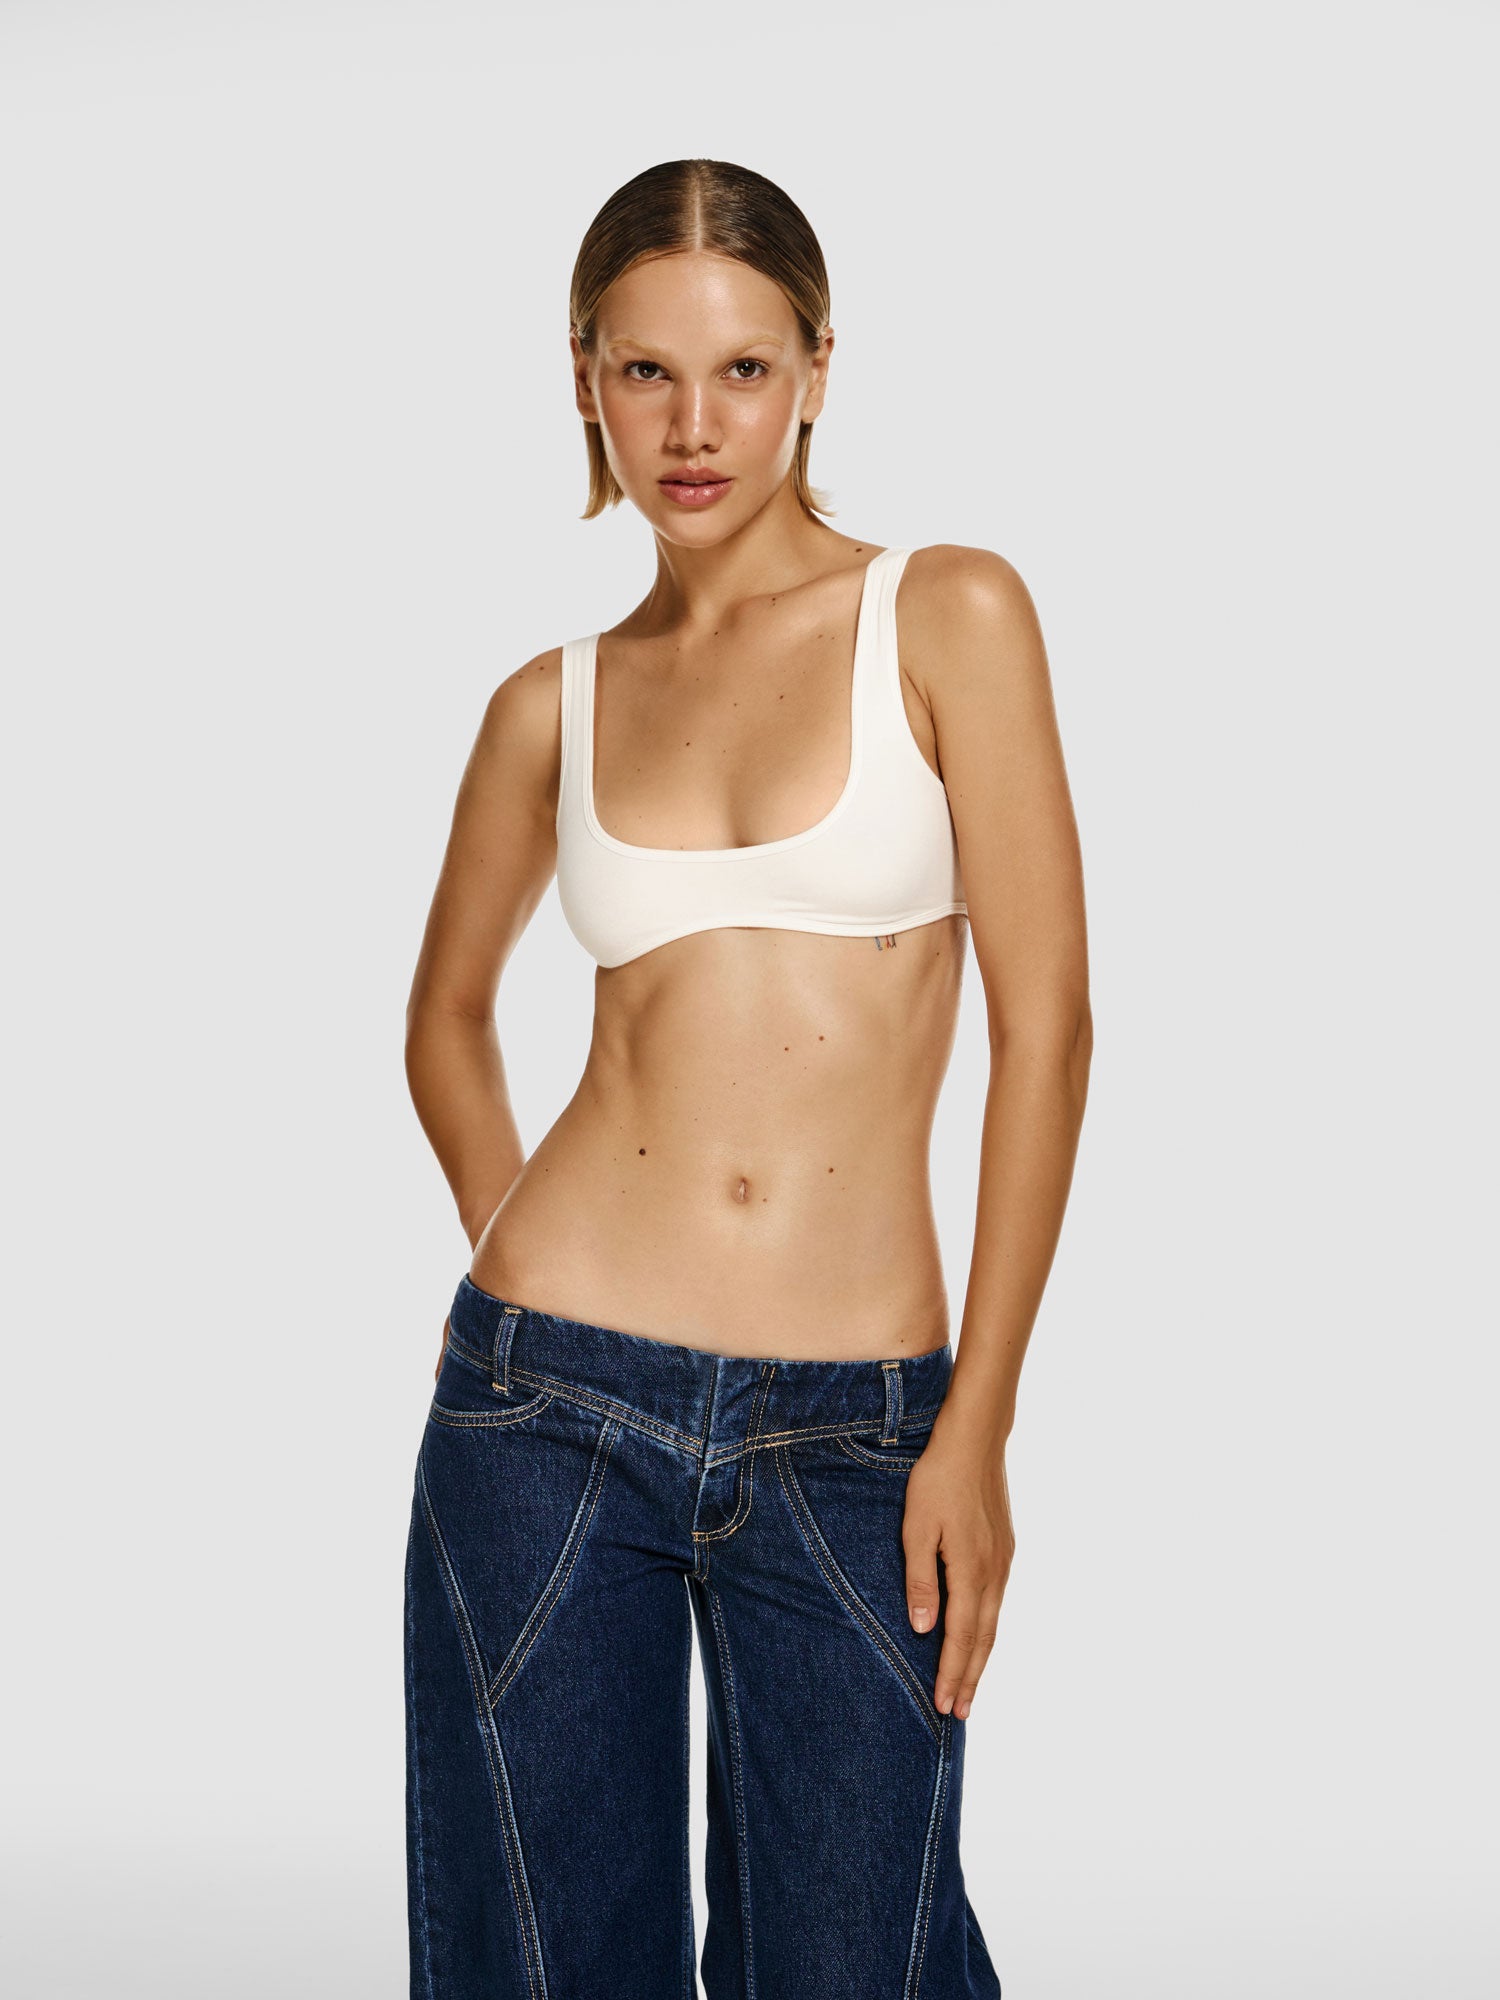 Cowboy shot of a girl in a white viscose crop top and blue wide leg jeans with low rise